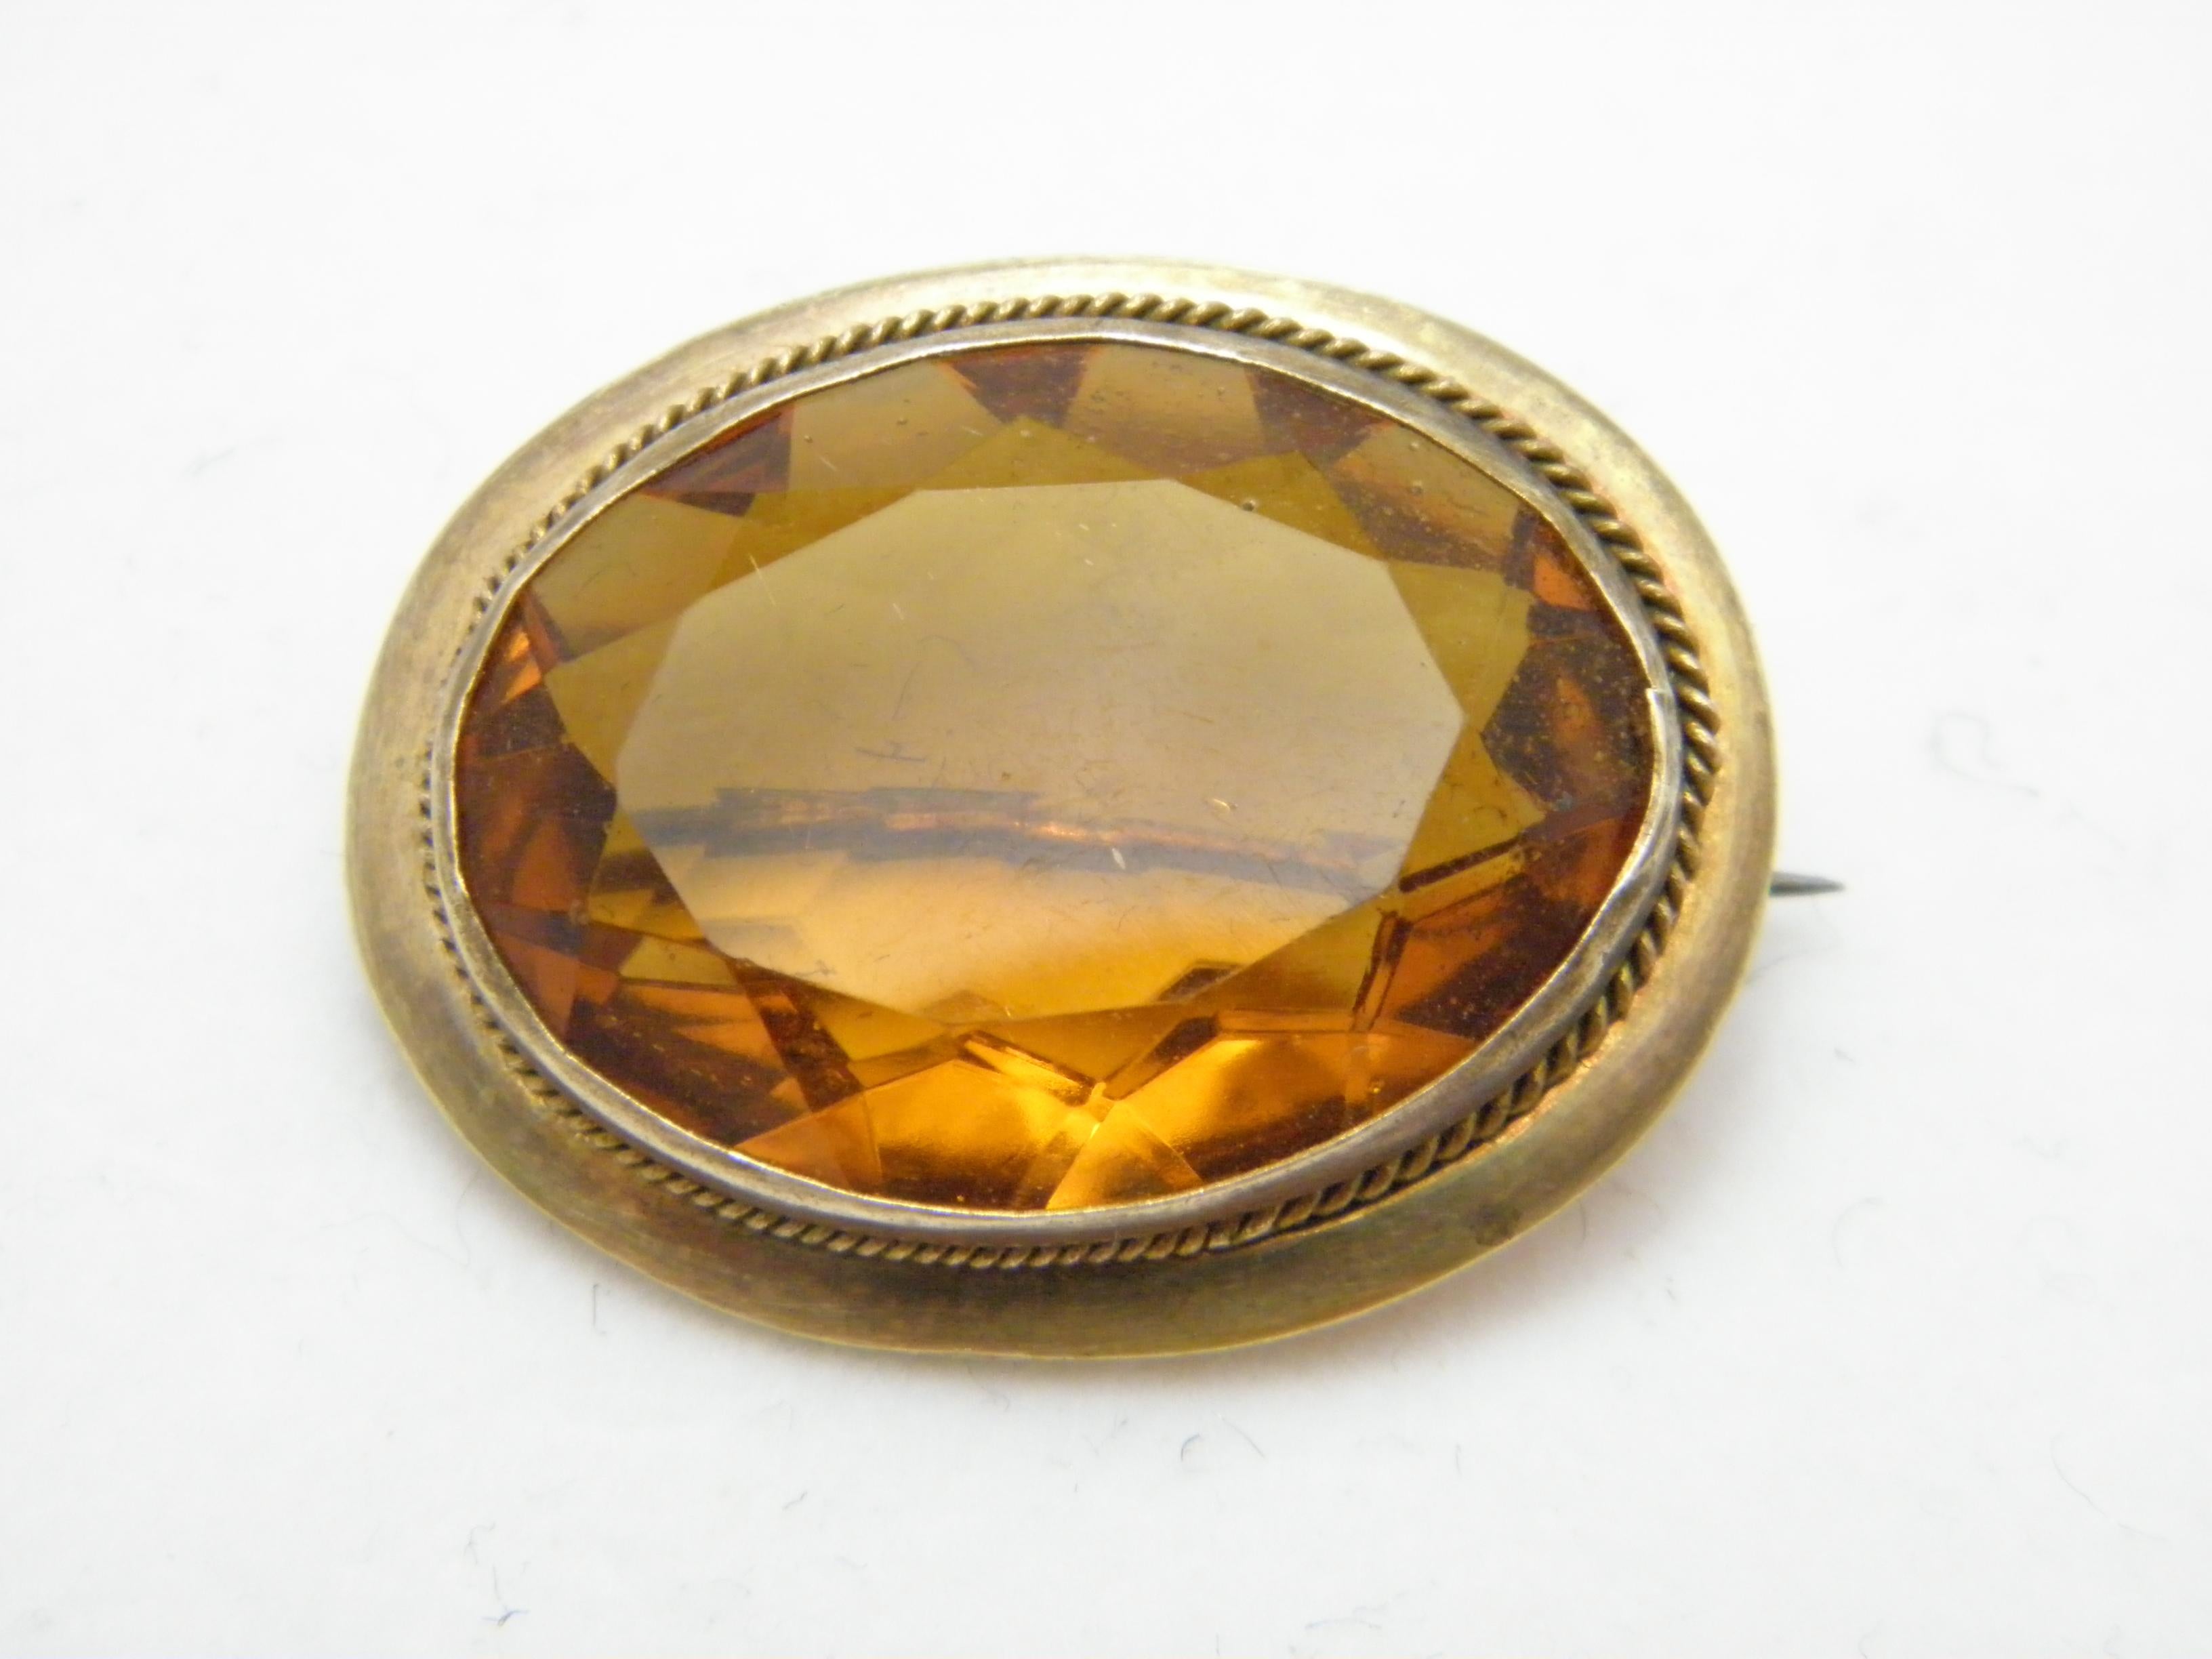 If you have landed on this page then you have an eye for beauty.

On offer is this gorgeous

9CT HEAVY ROSE GOLD AMBER CITRINE BROOCH

DETAILS
Material: 9ct (375/000) Solid Rose Gold (typical colour of the era)
Style: Victorian classic gemstone